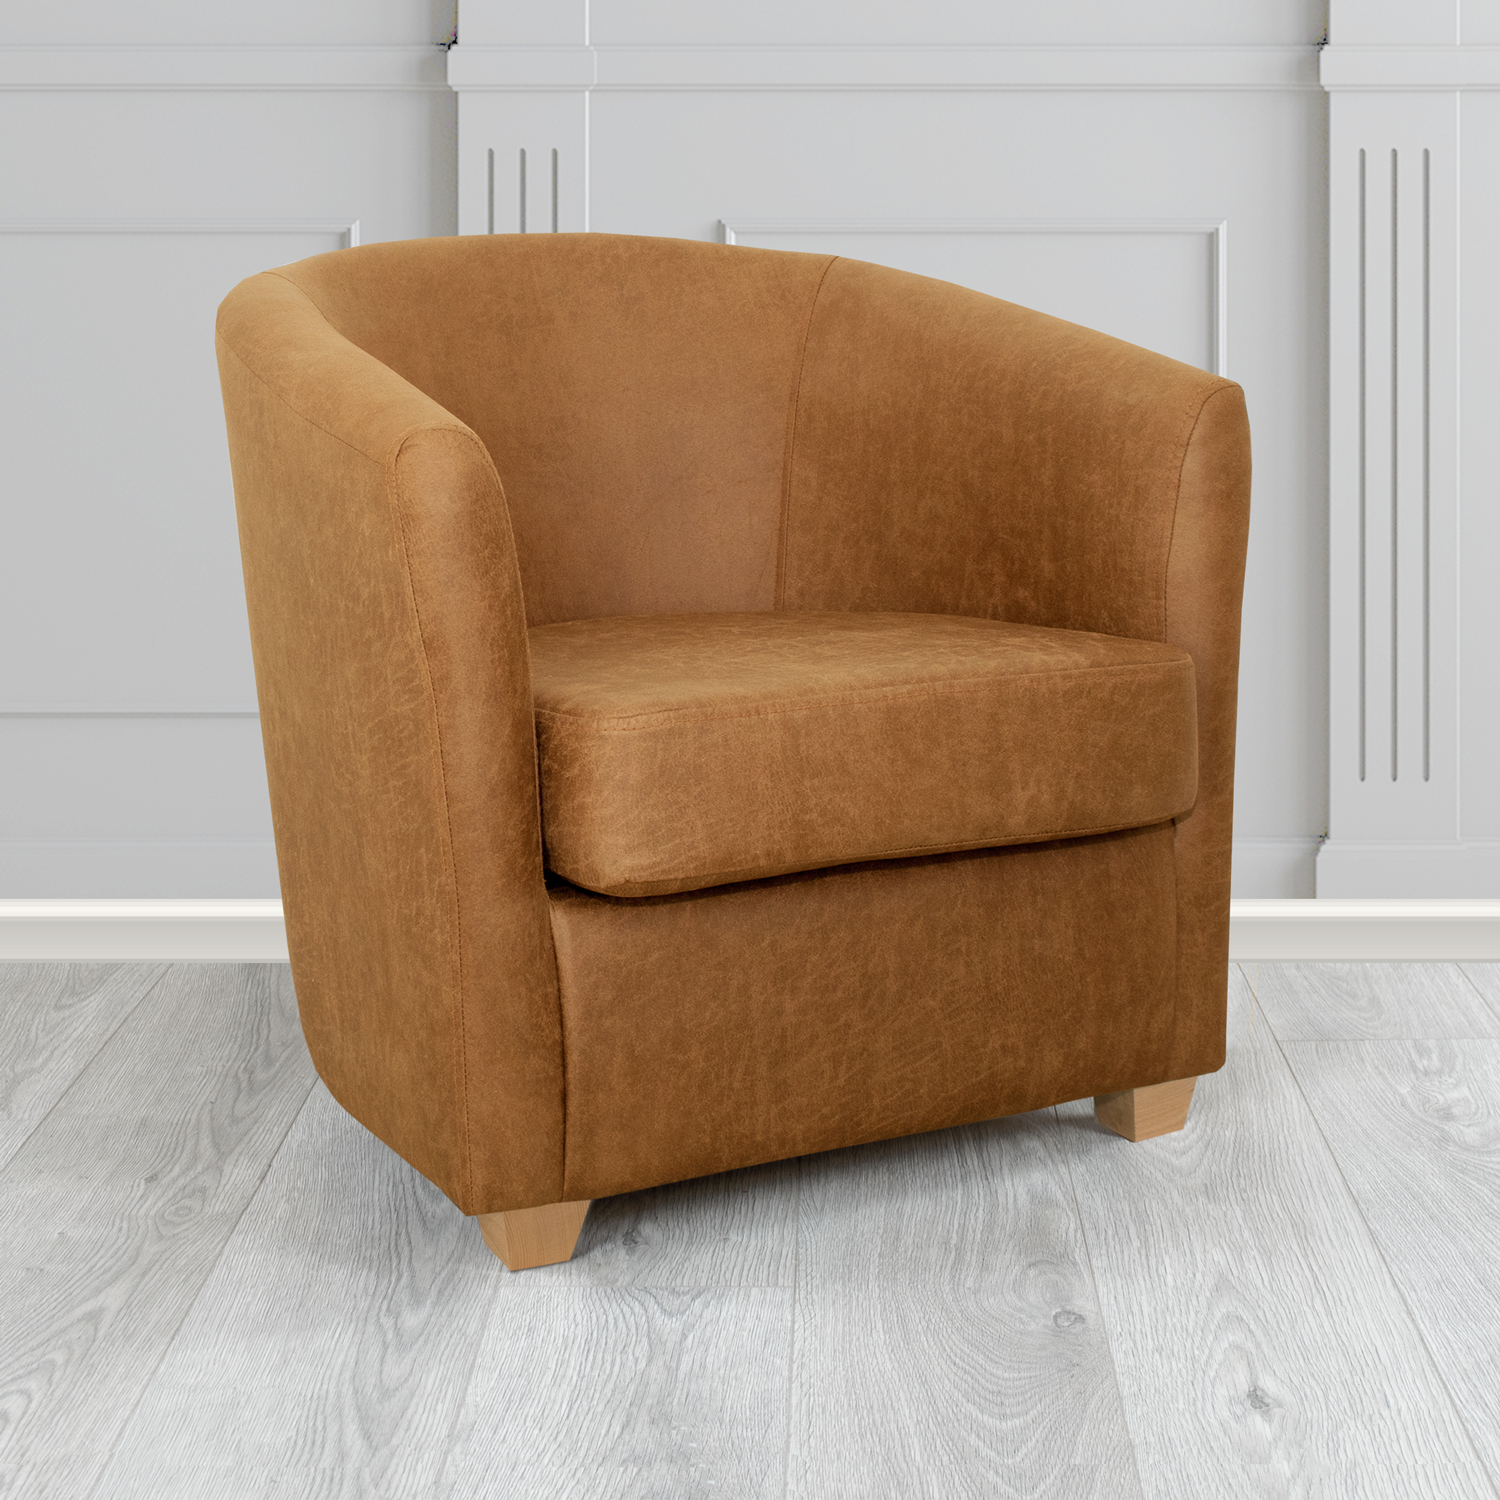 Cannes Tub Chair in Nevada Rust Faux Leather - The Tub Chair Shop